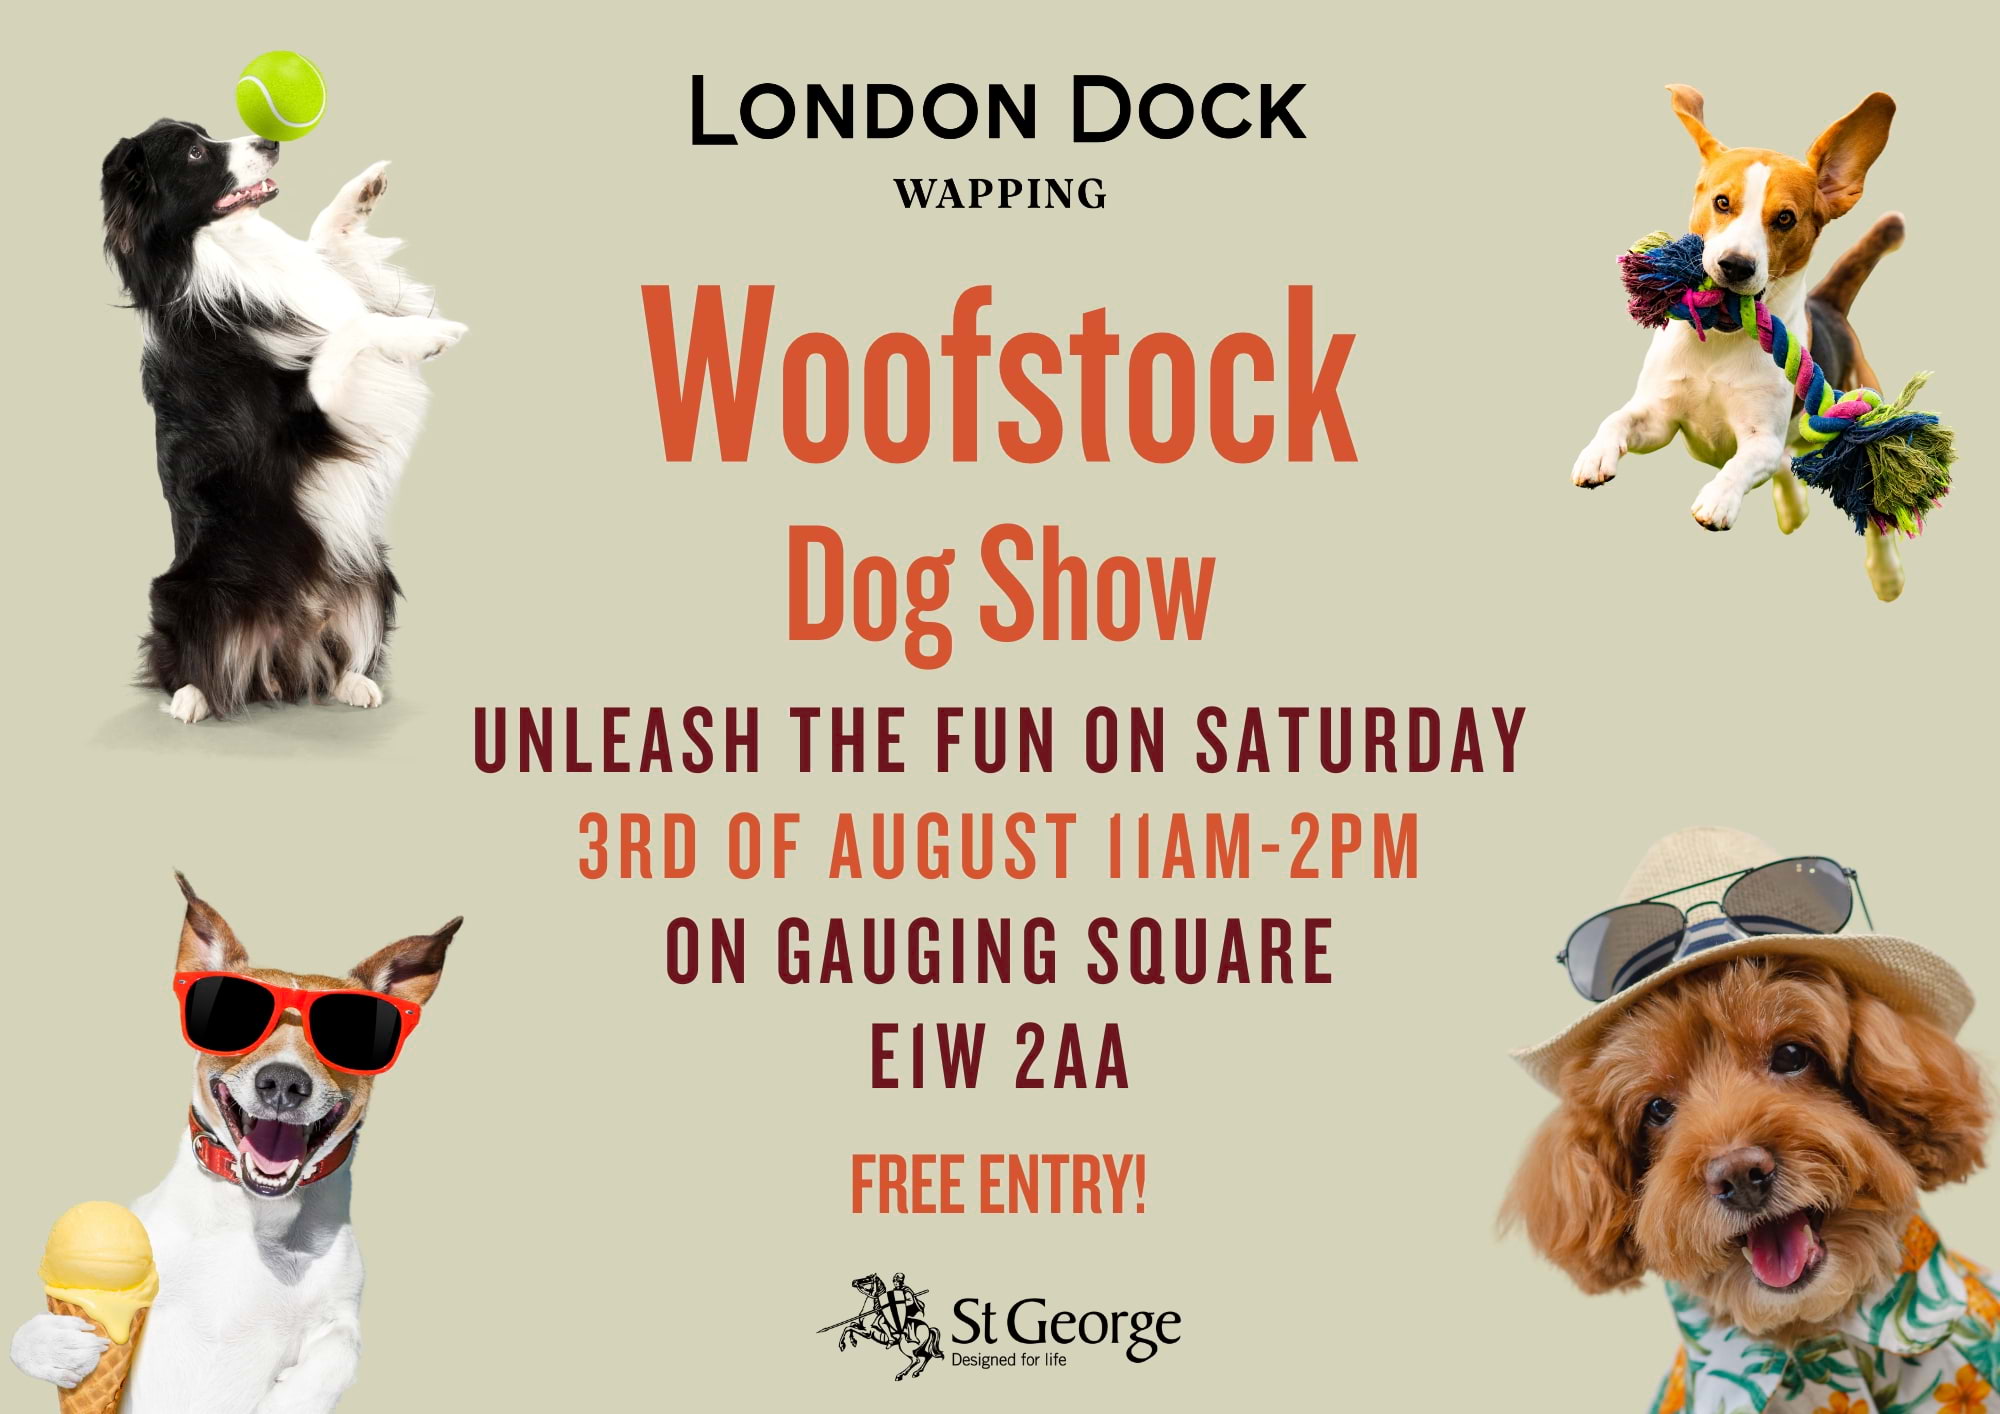 Enjoy a day of woof-tastic fun at London Dock's Summer Dog Show